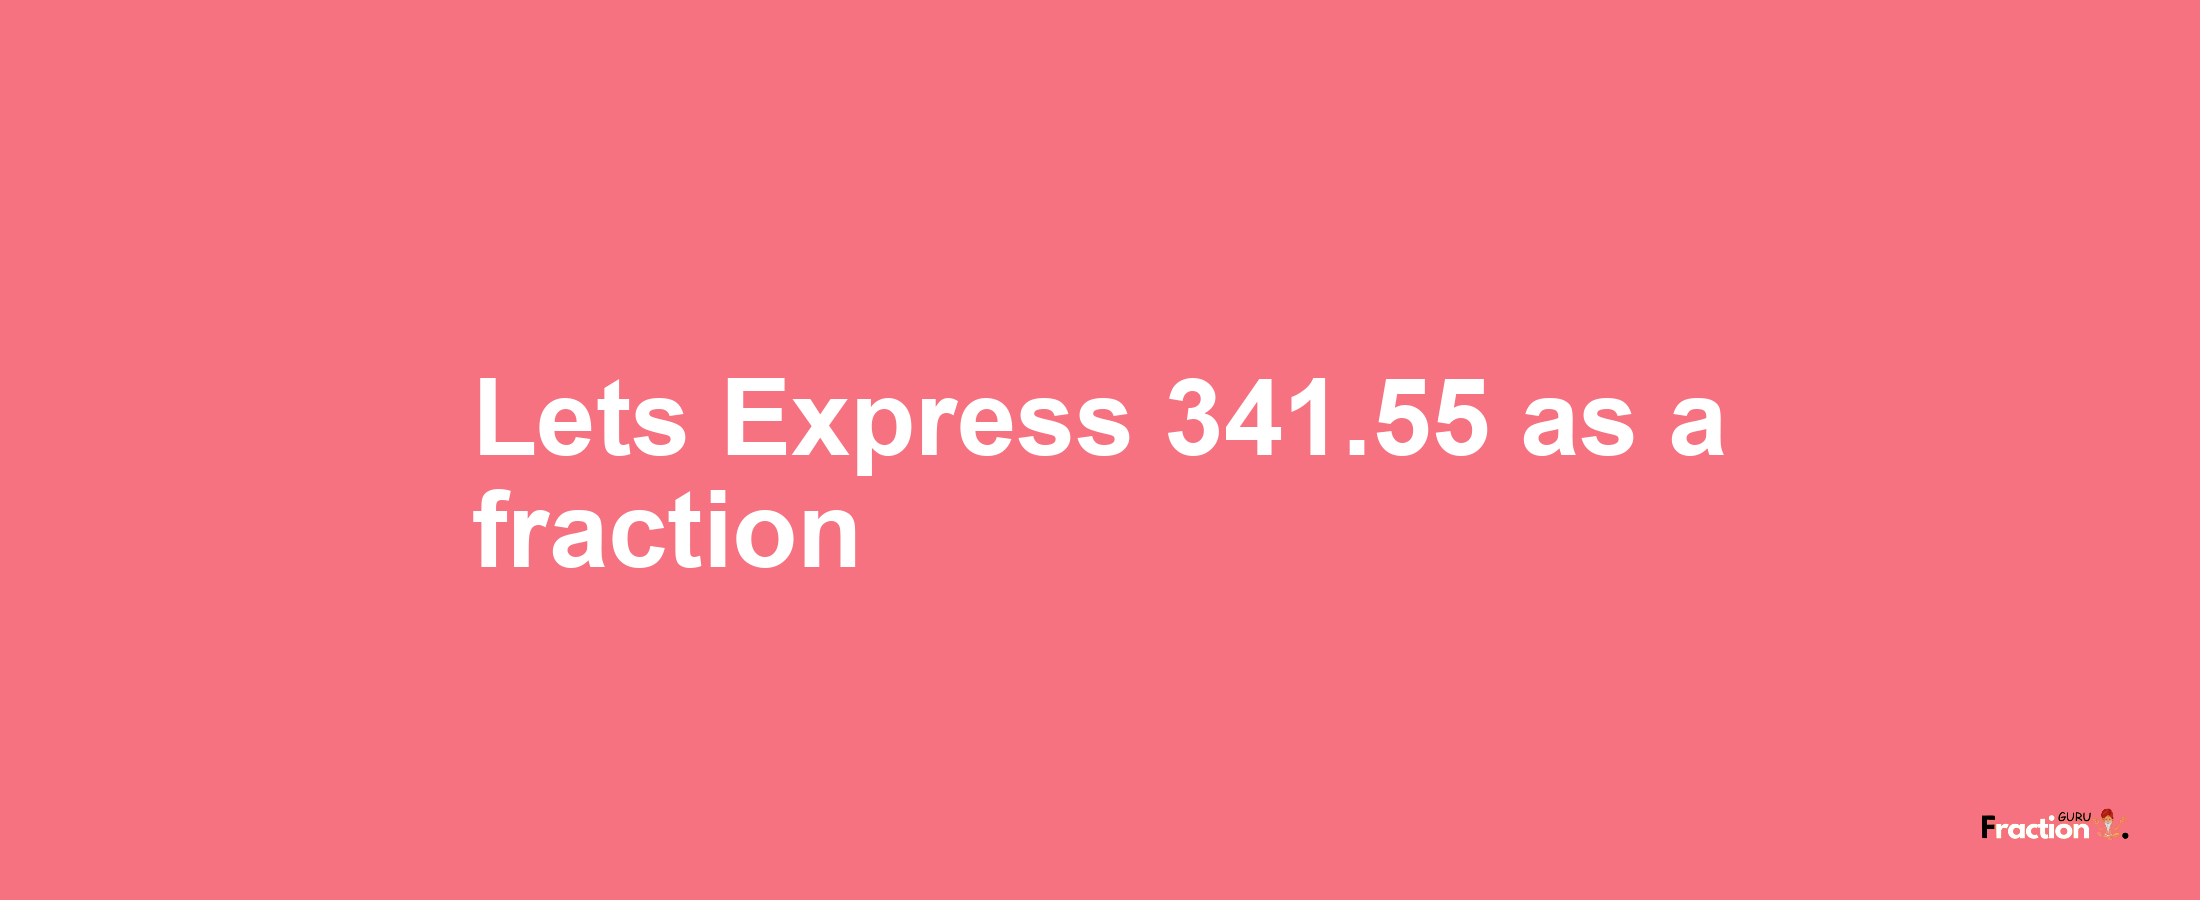 Lets Express 341.55 as afraction